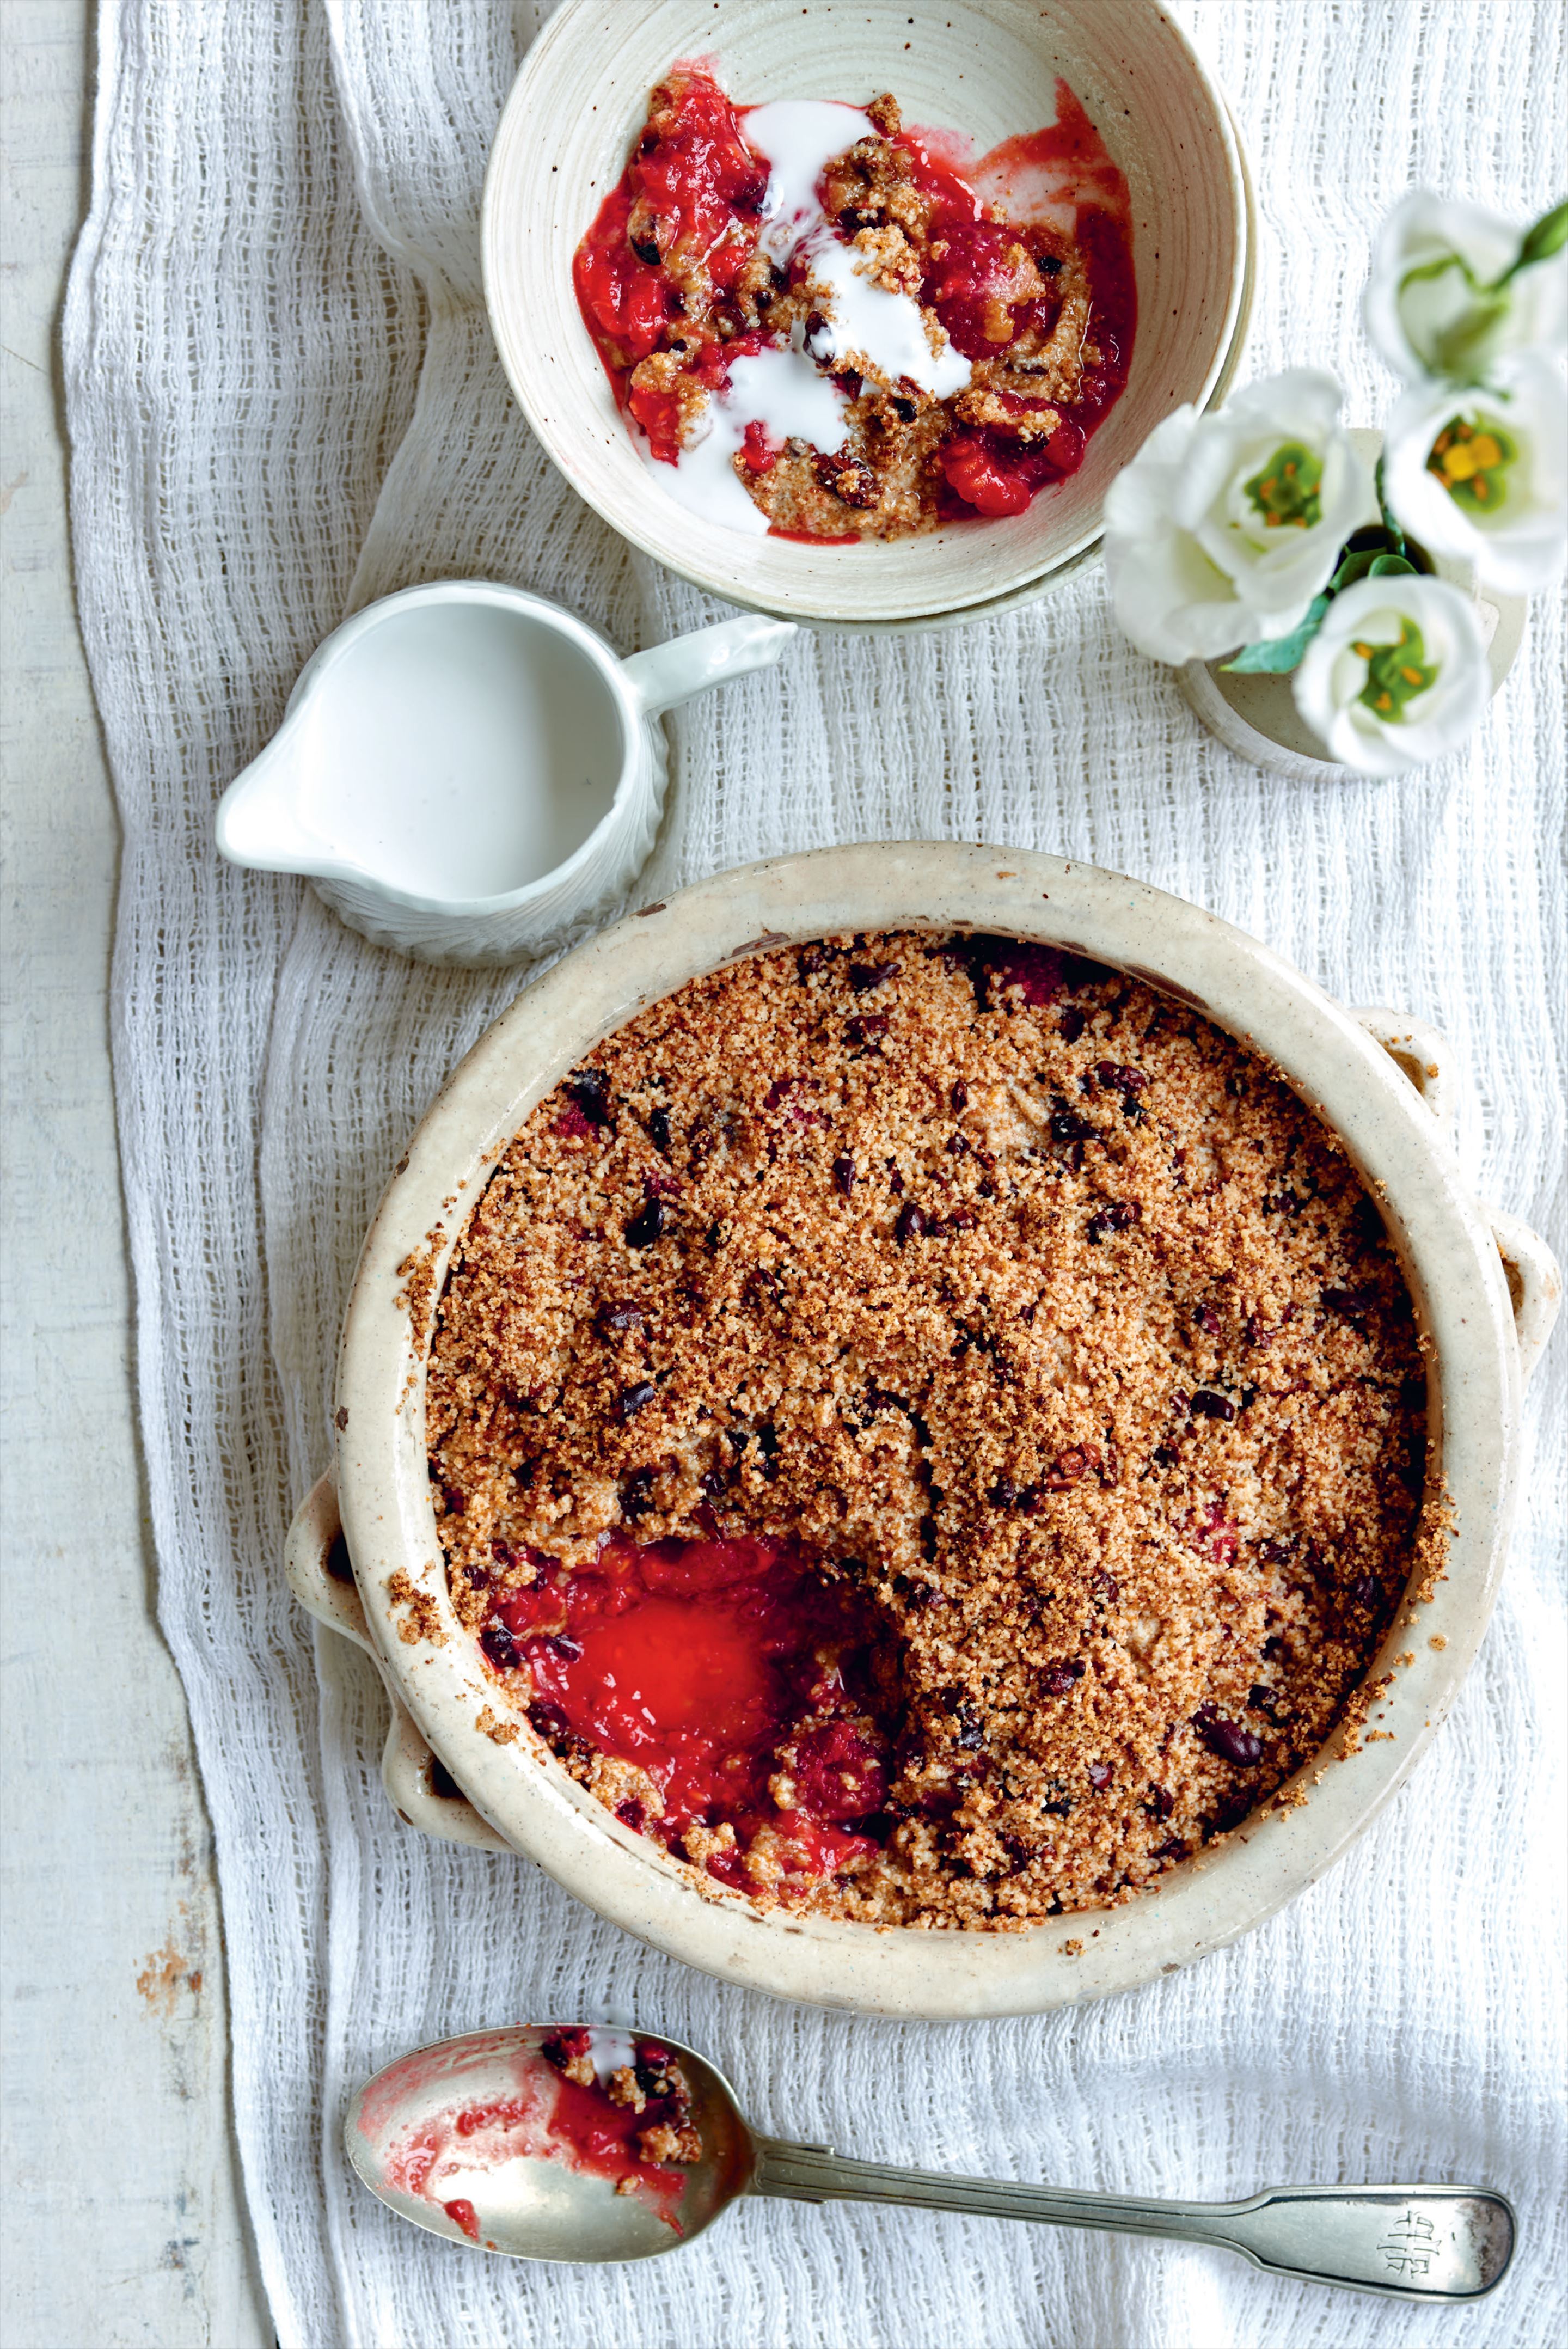 Raspberry, cacao nib and coconut oil crumble